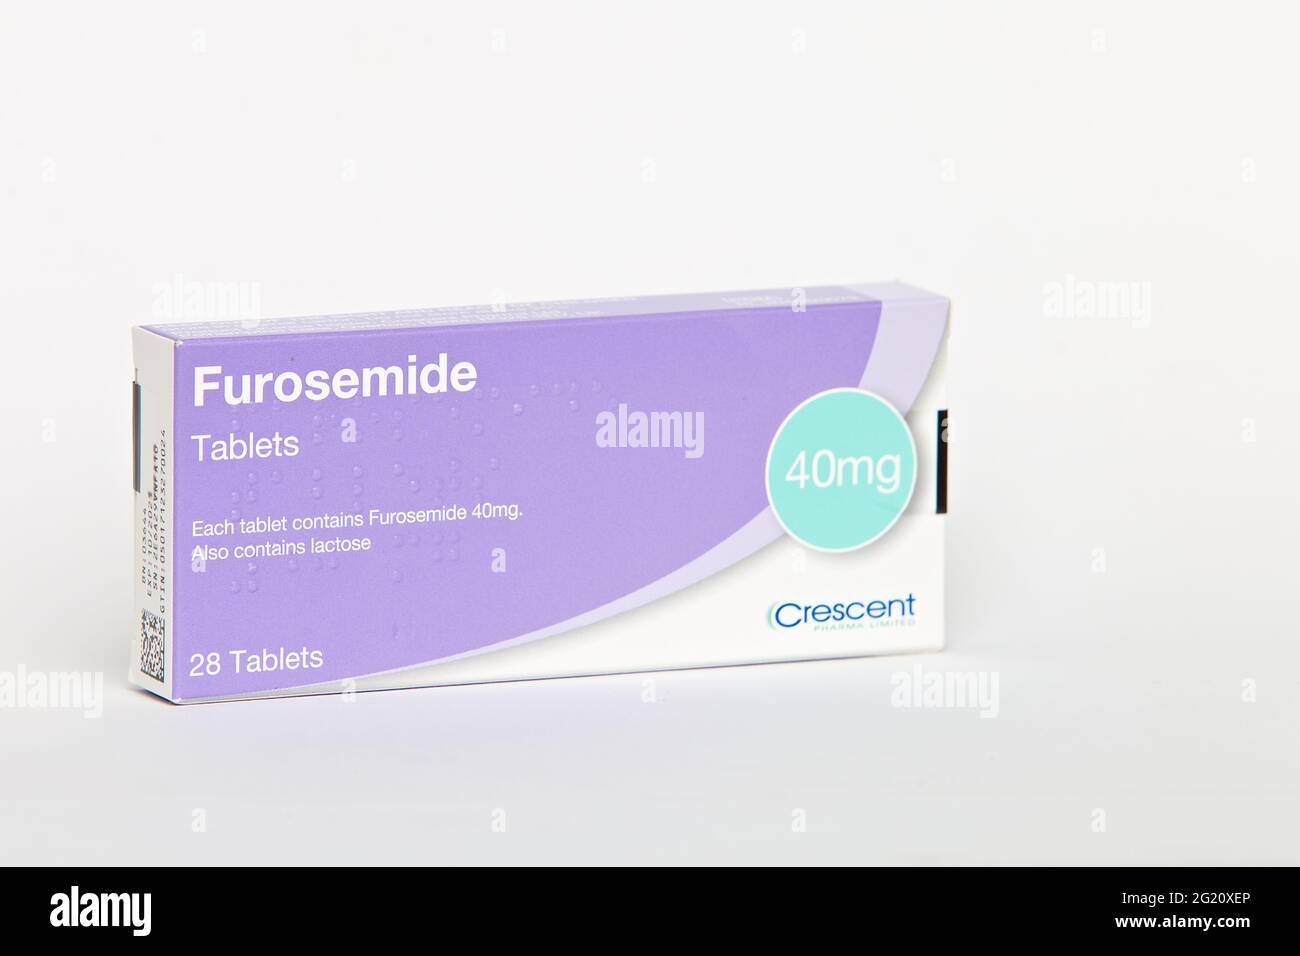 Furosemide High Resolution Stock Photography and Images - Alamy